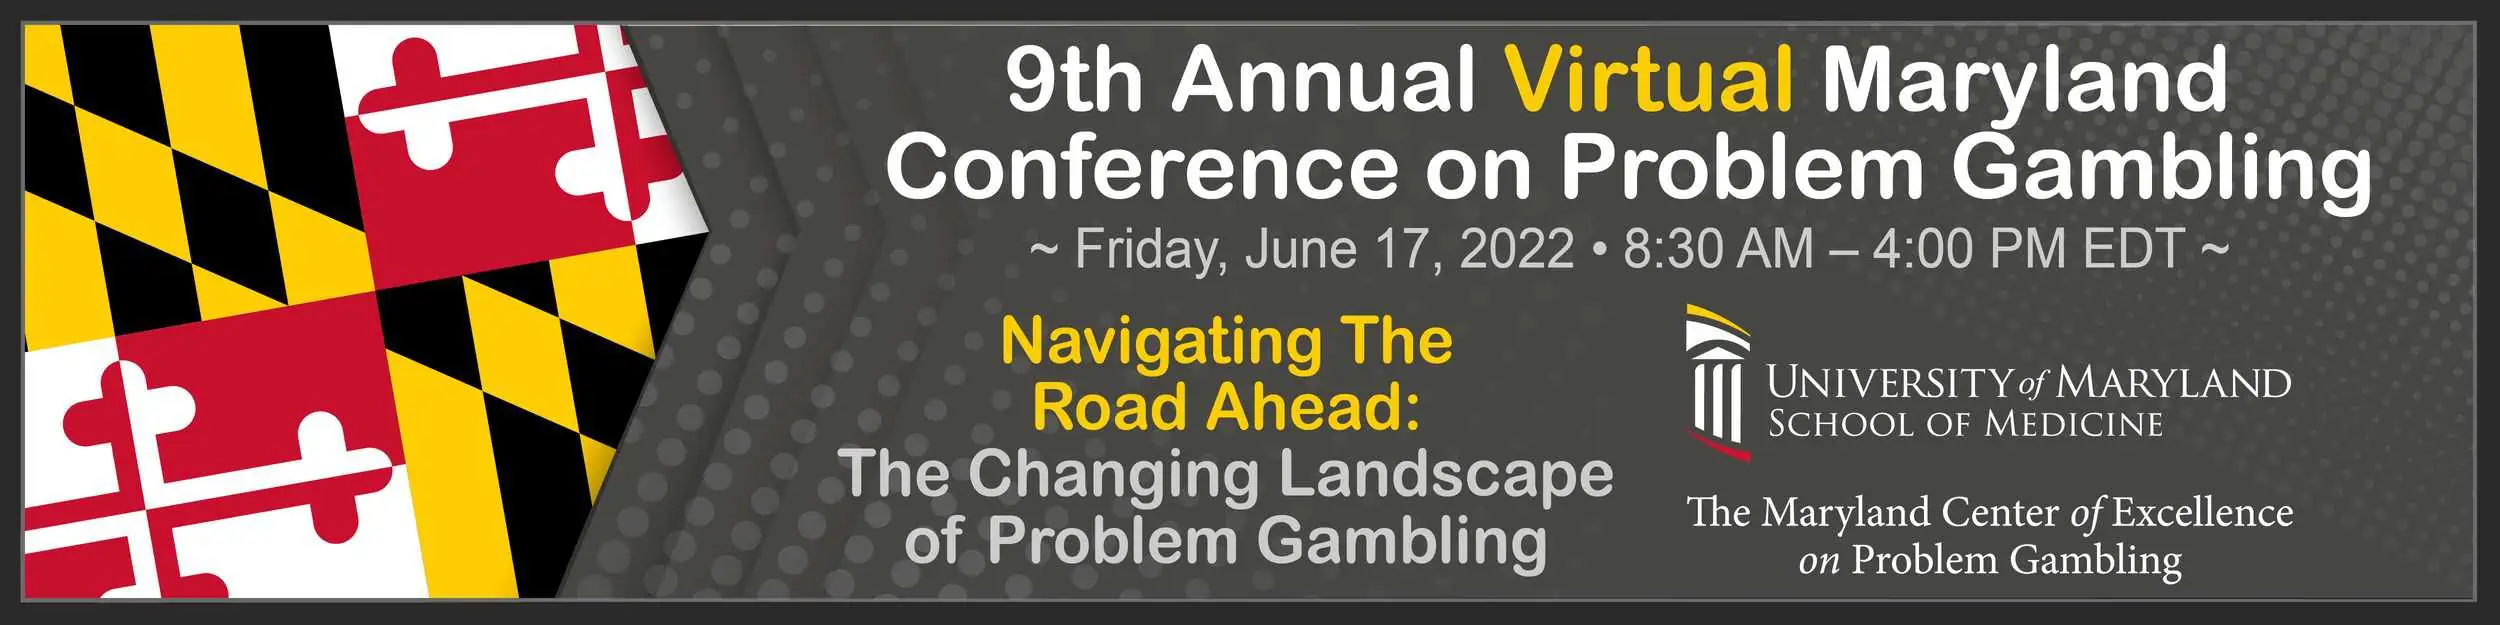 9th Annual Maryland Conference on Problem Gambling